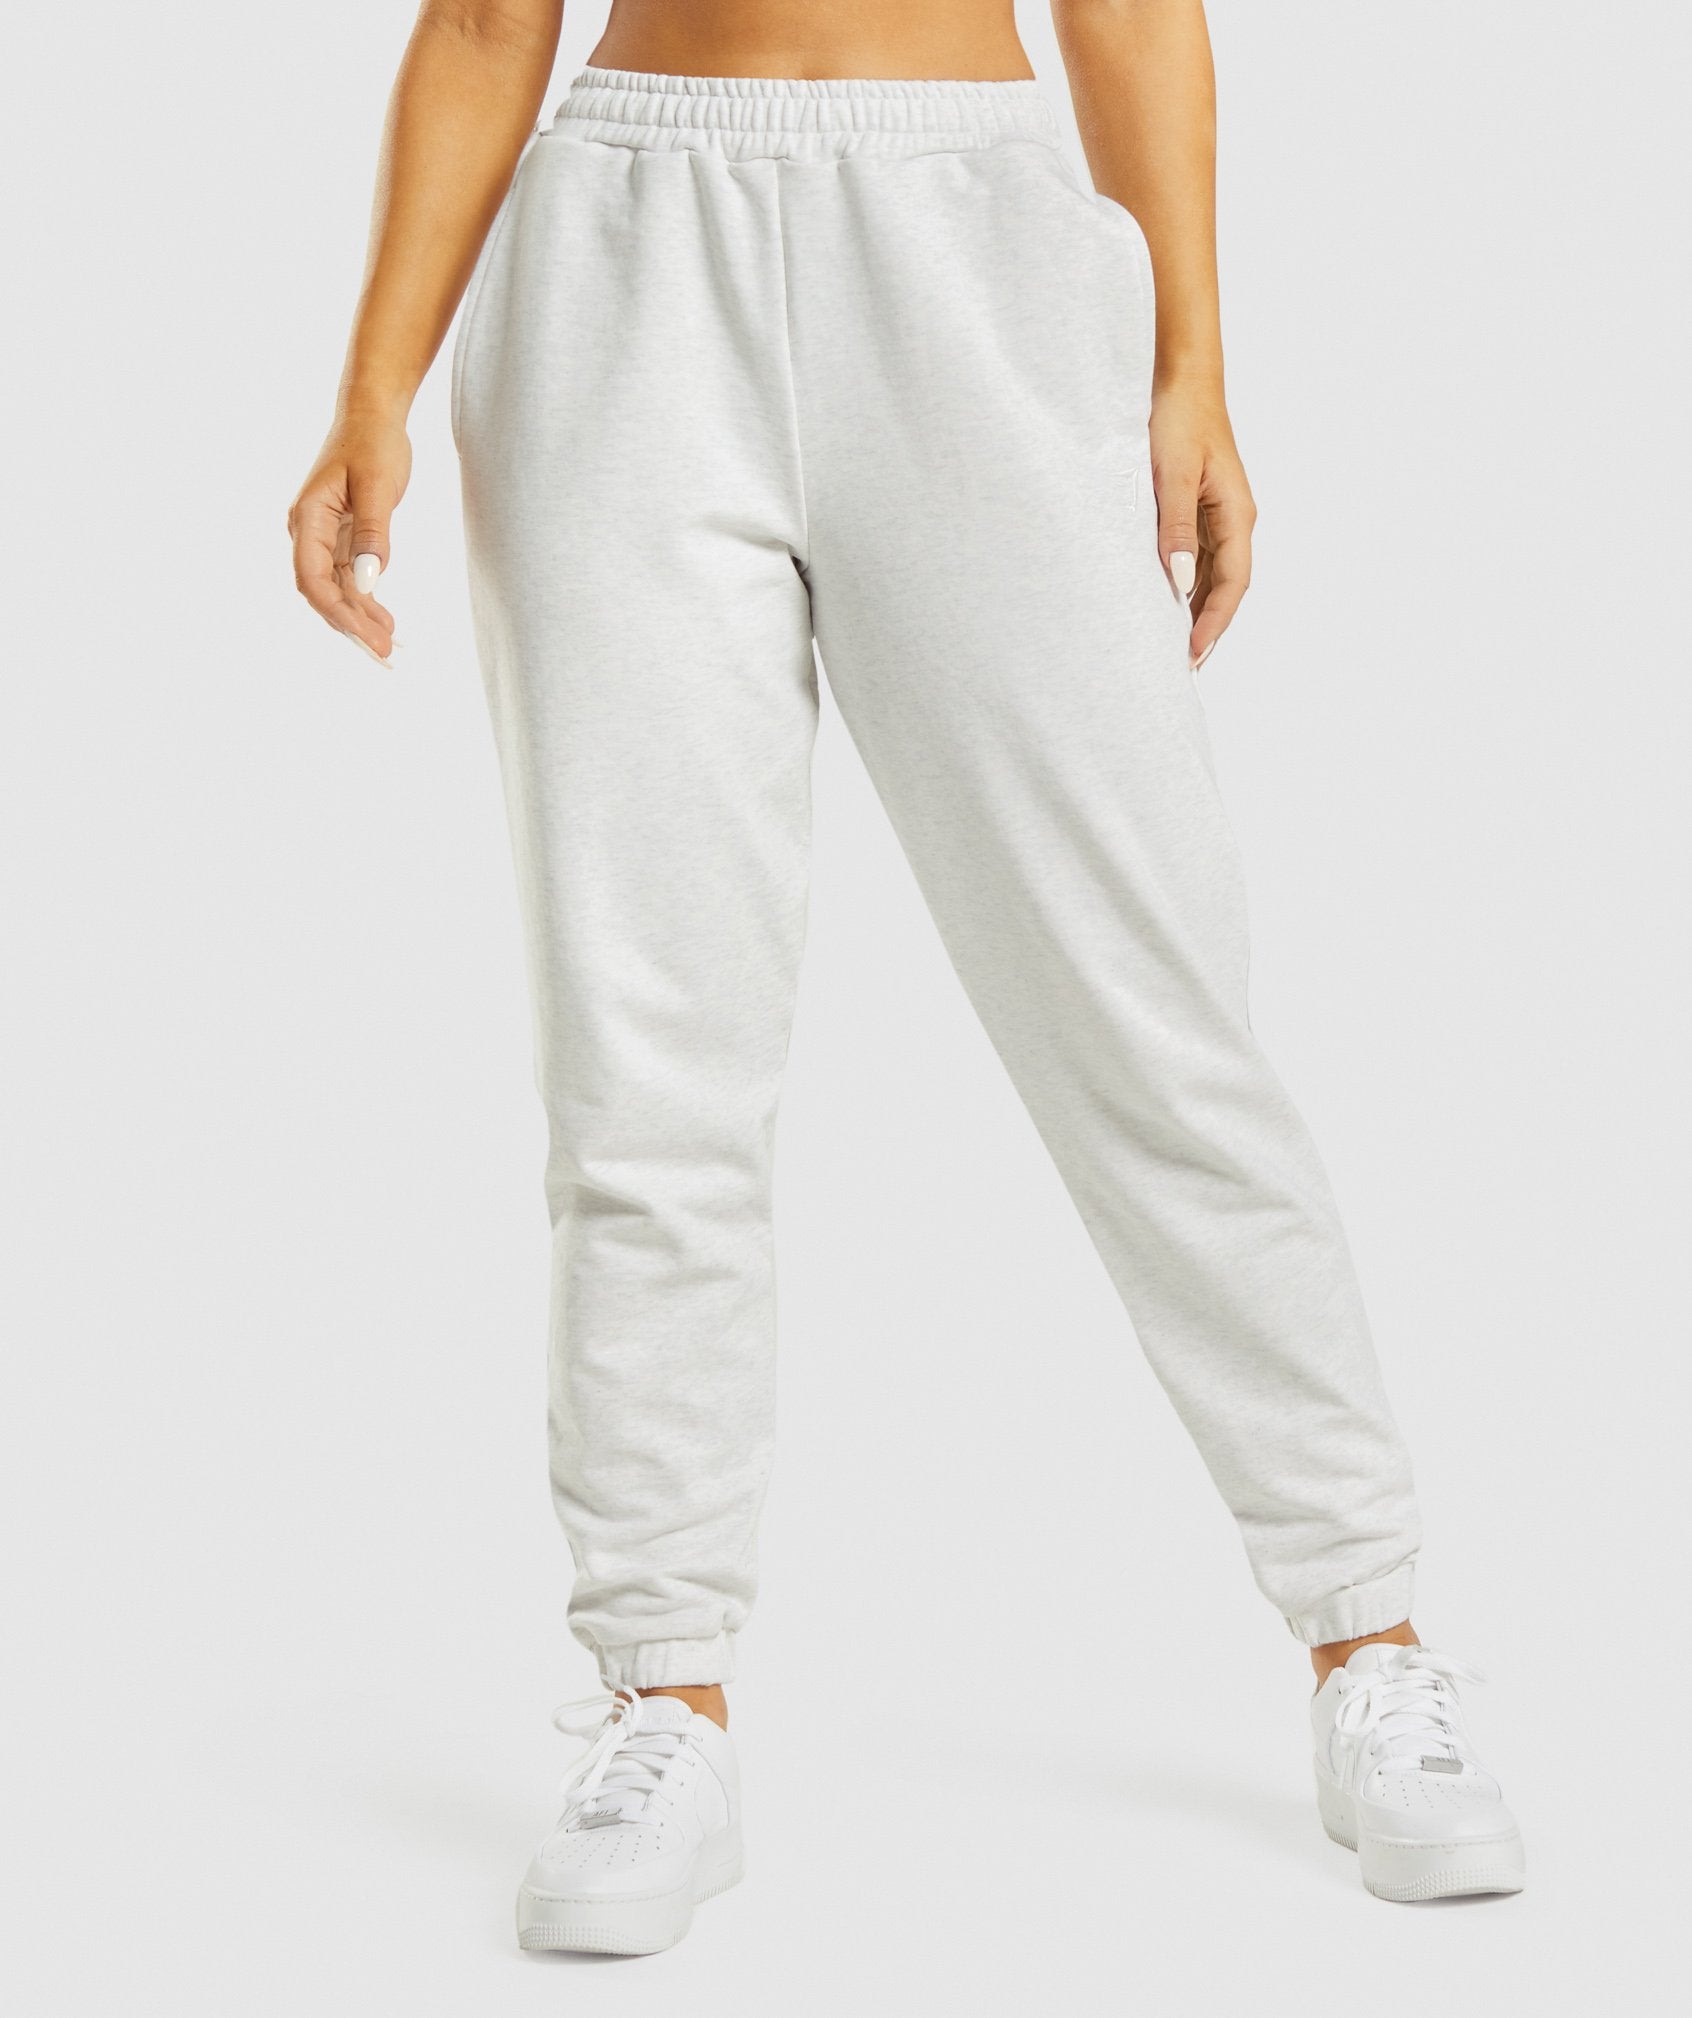 Gymshark Lace Athletic Sweat Pants for Women